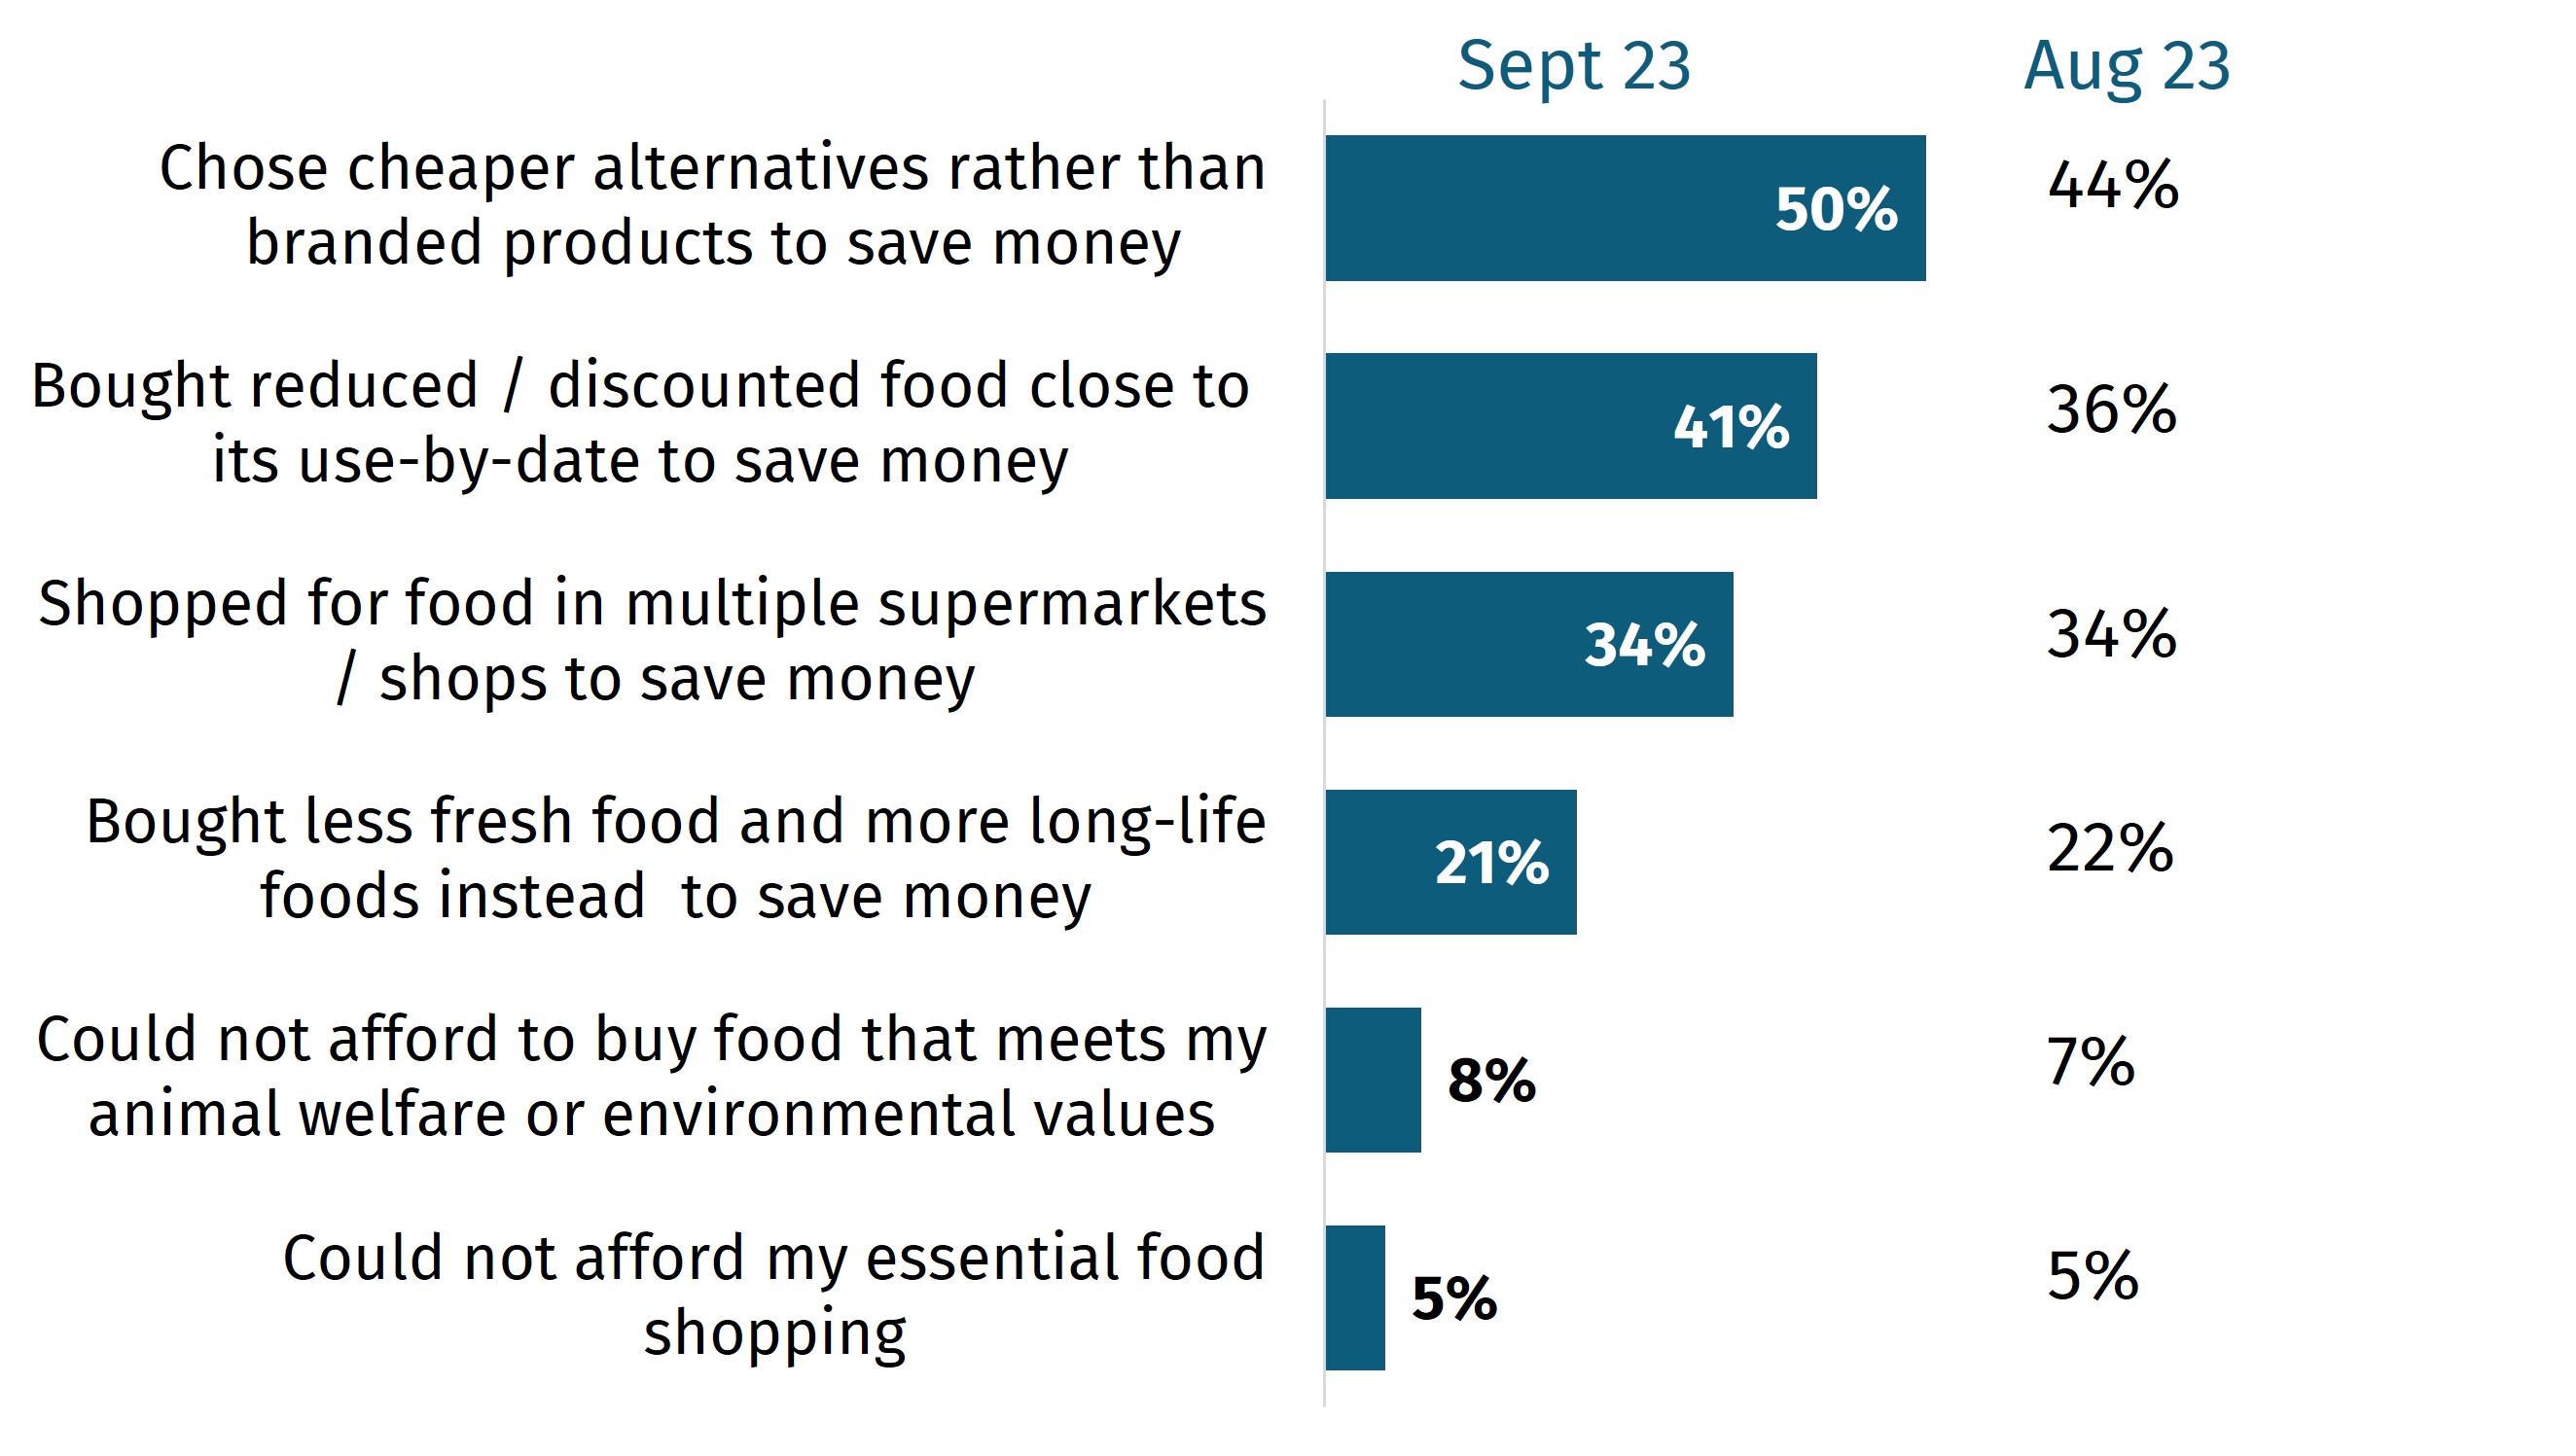 50% chose cheaper alternatives rather than branded products to save money compared to 44% in August. 41% bought reduced products in September compared to 36% in August. 